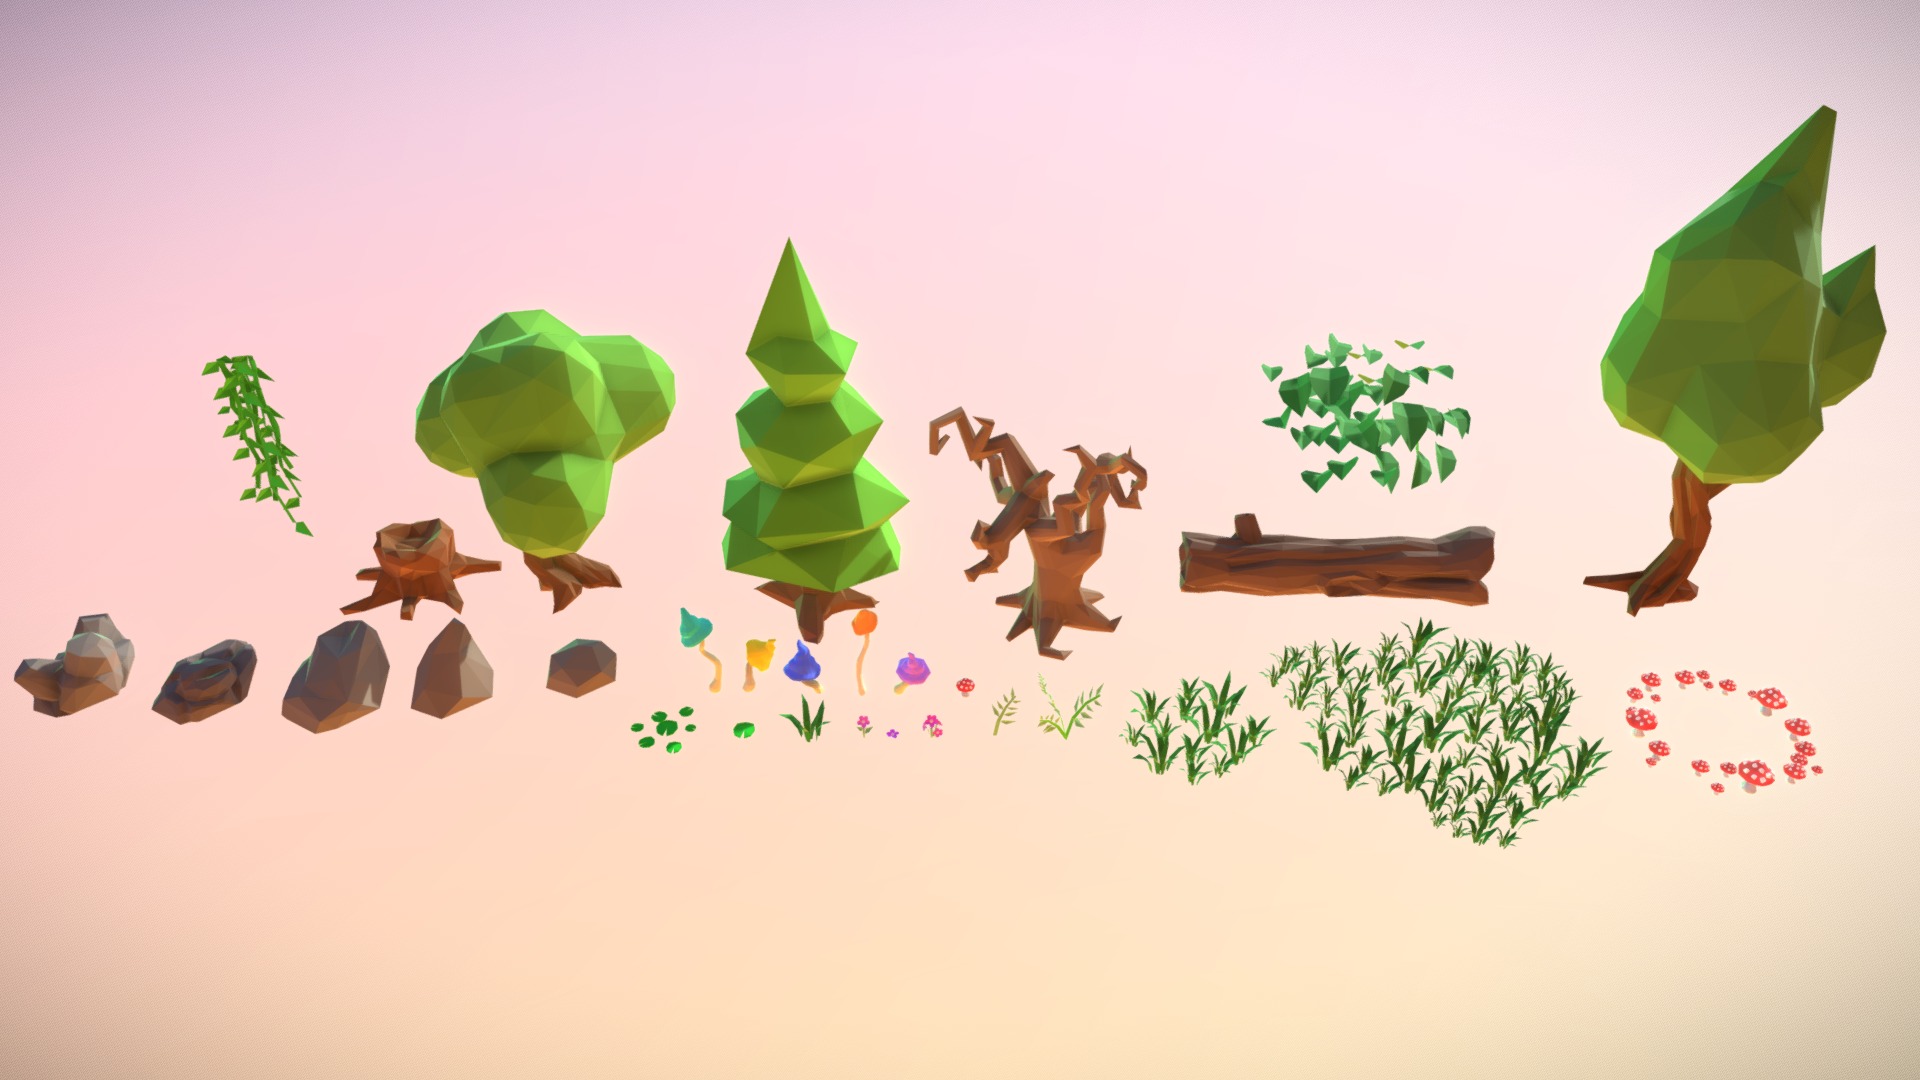 3D model Low Poly Nature Set - This is a 3D model of the Low Poly Nature Set. The 3D model is about a group of different colored trees.